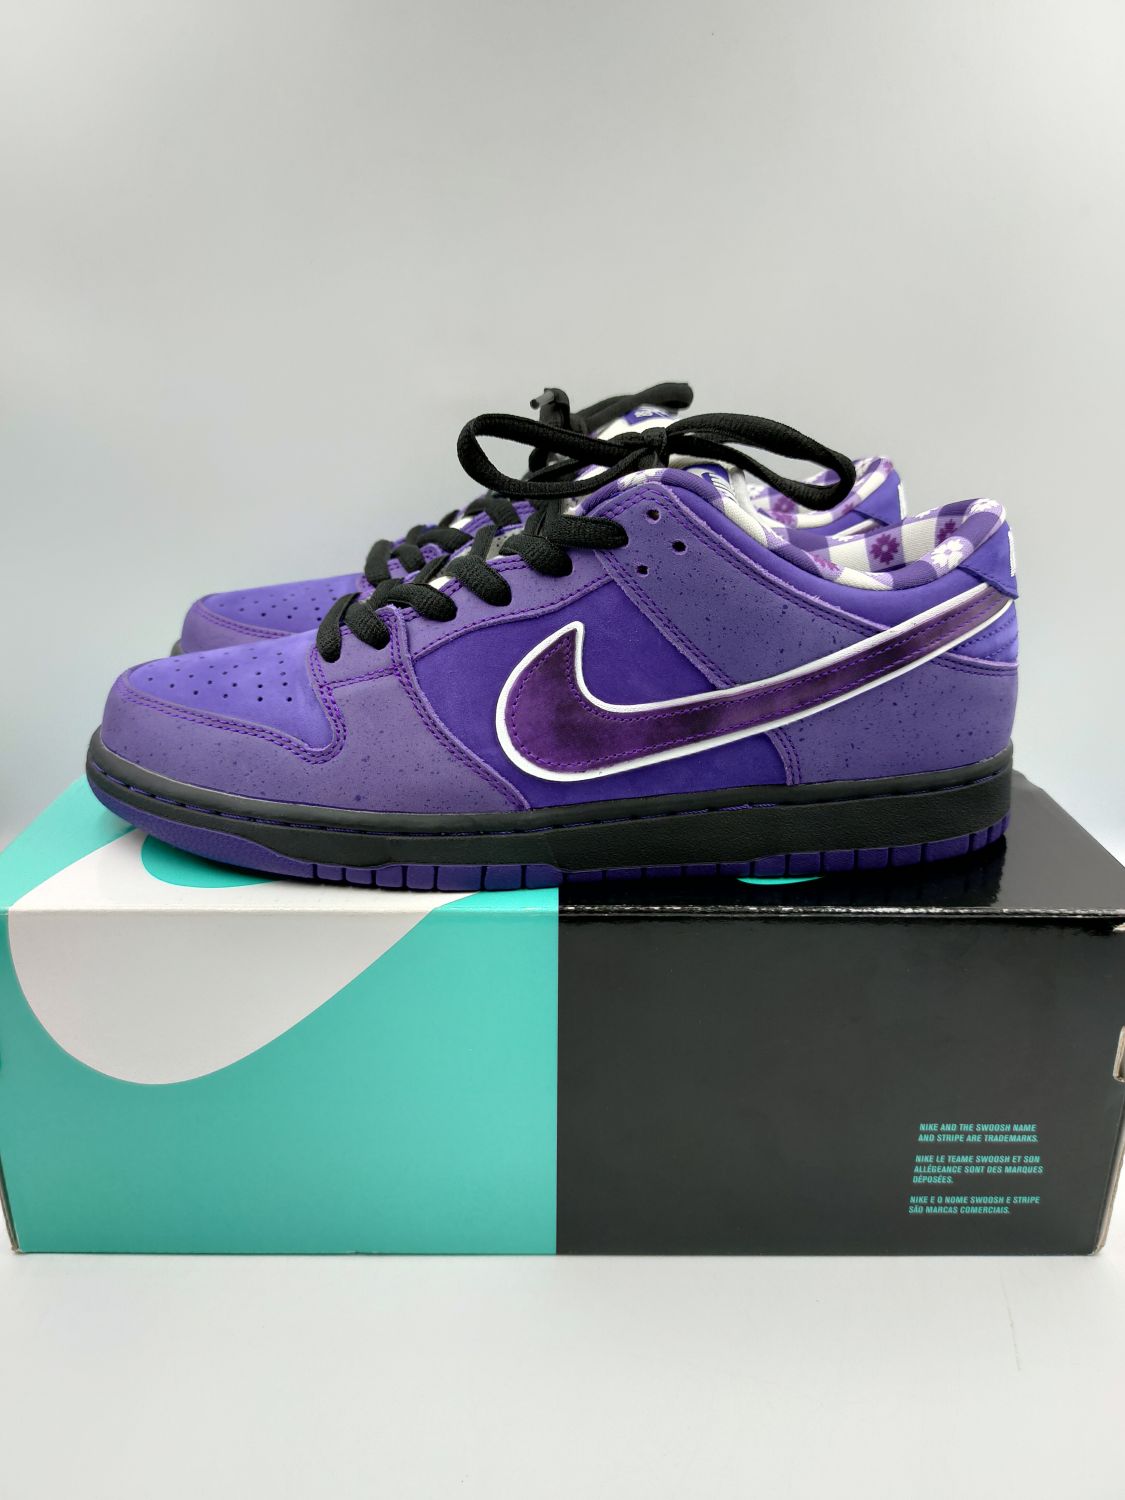 Nike SB Dunk Low Concepts Purple Lobster | AfterMarket